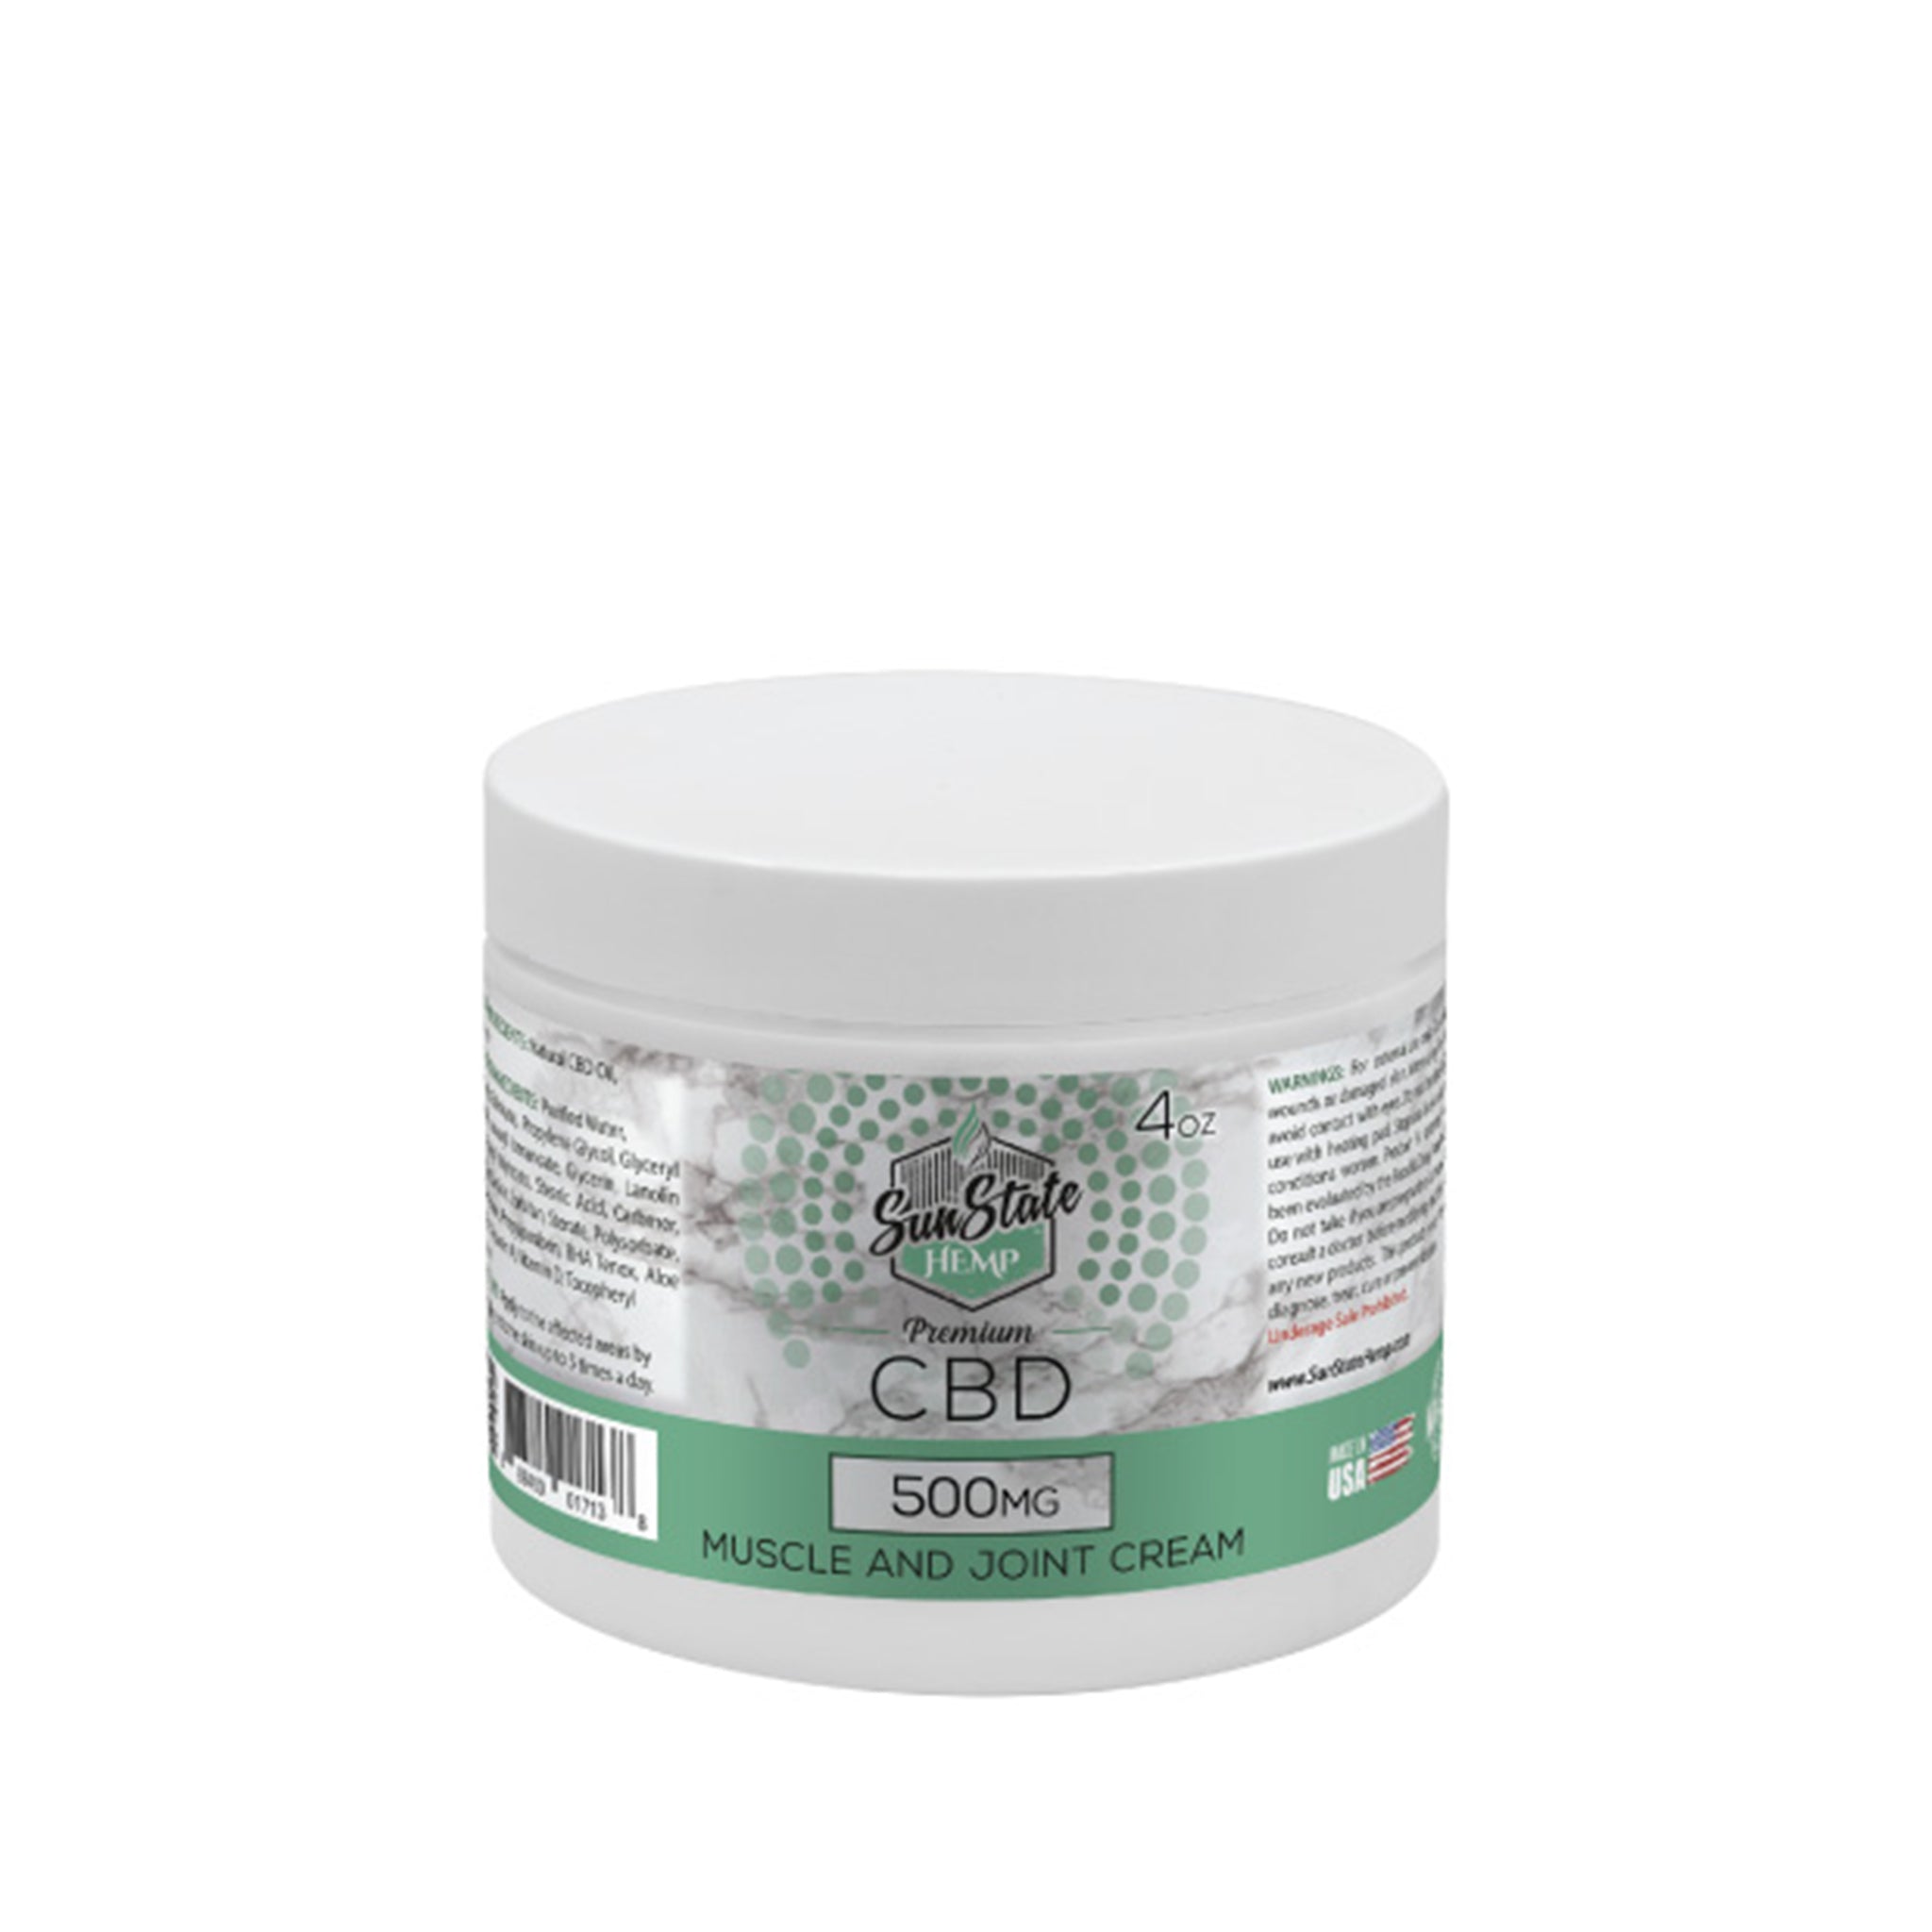 Closed Jar of CBD Muscle and Joint Cream | 500mg